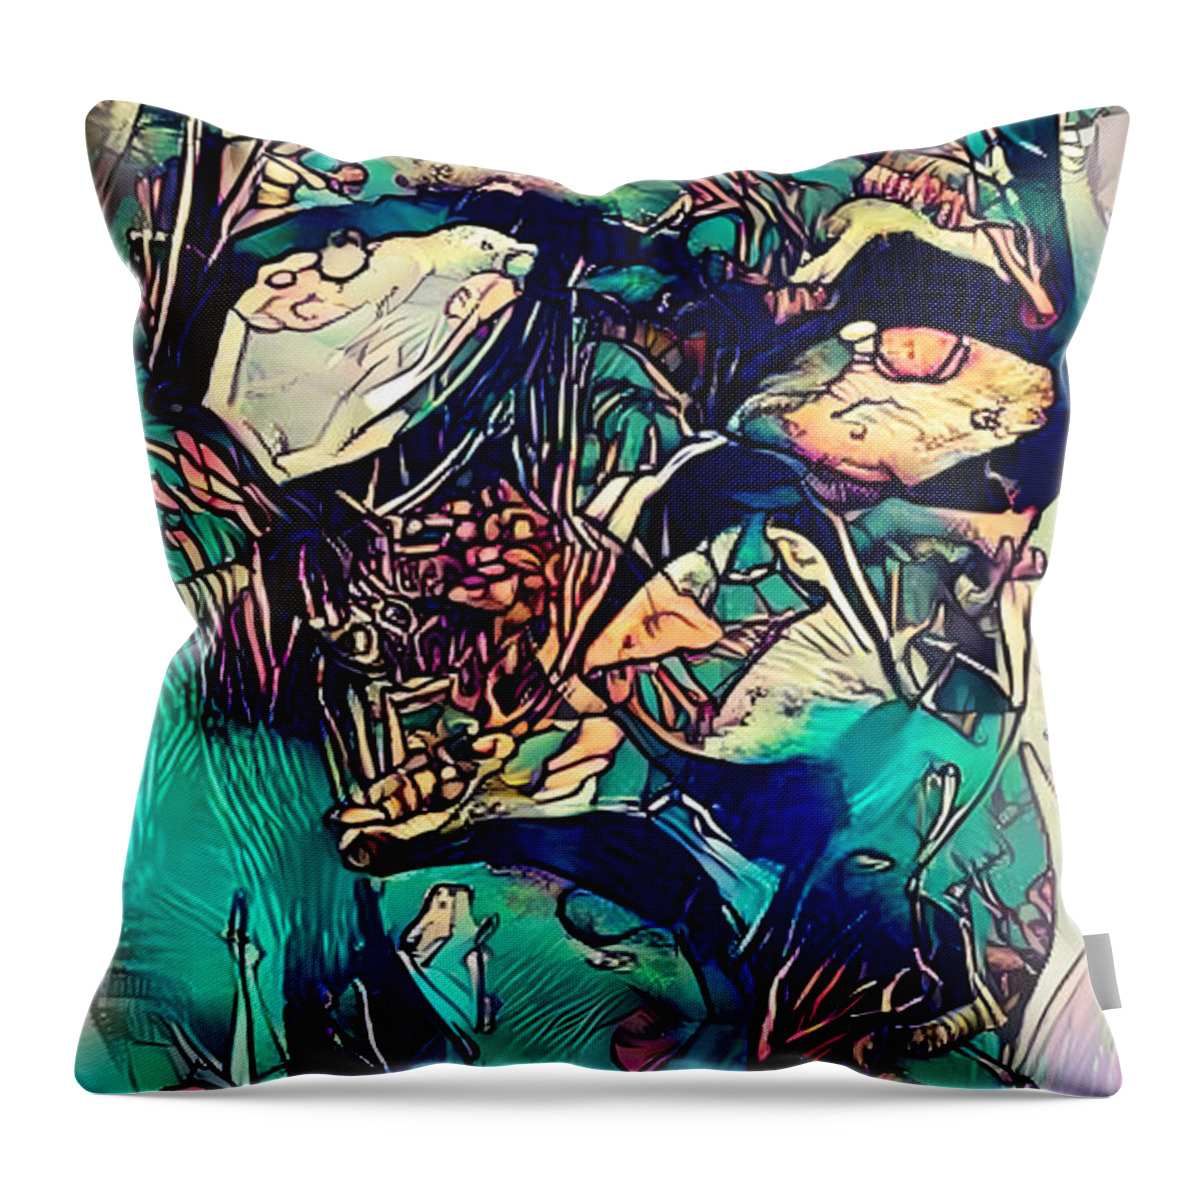 Contemporary Art Throw Pillow featuring the digital art 48 by Jeremiah Ray